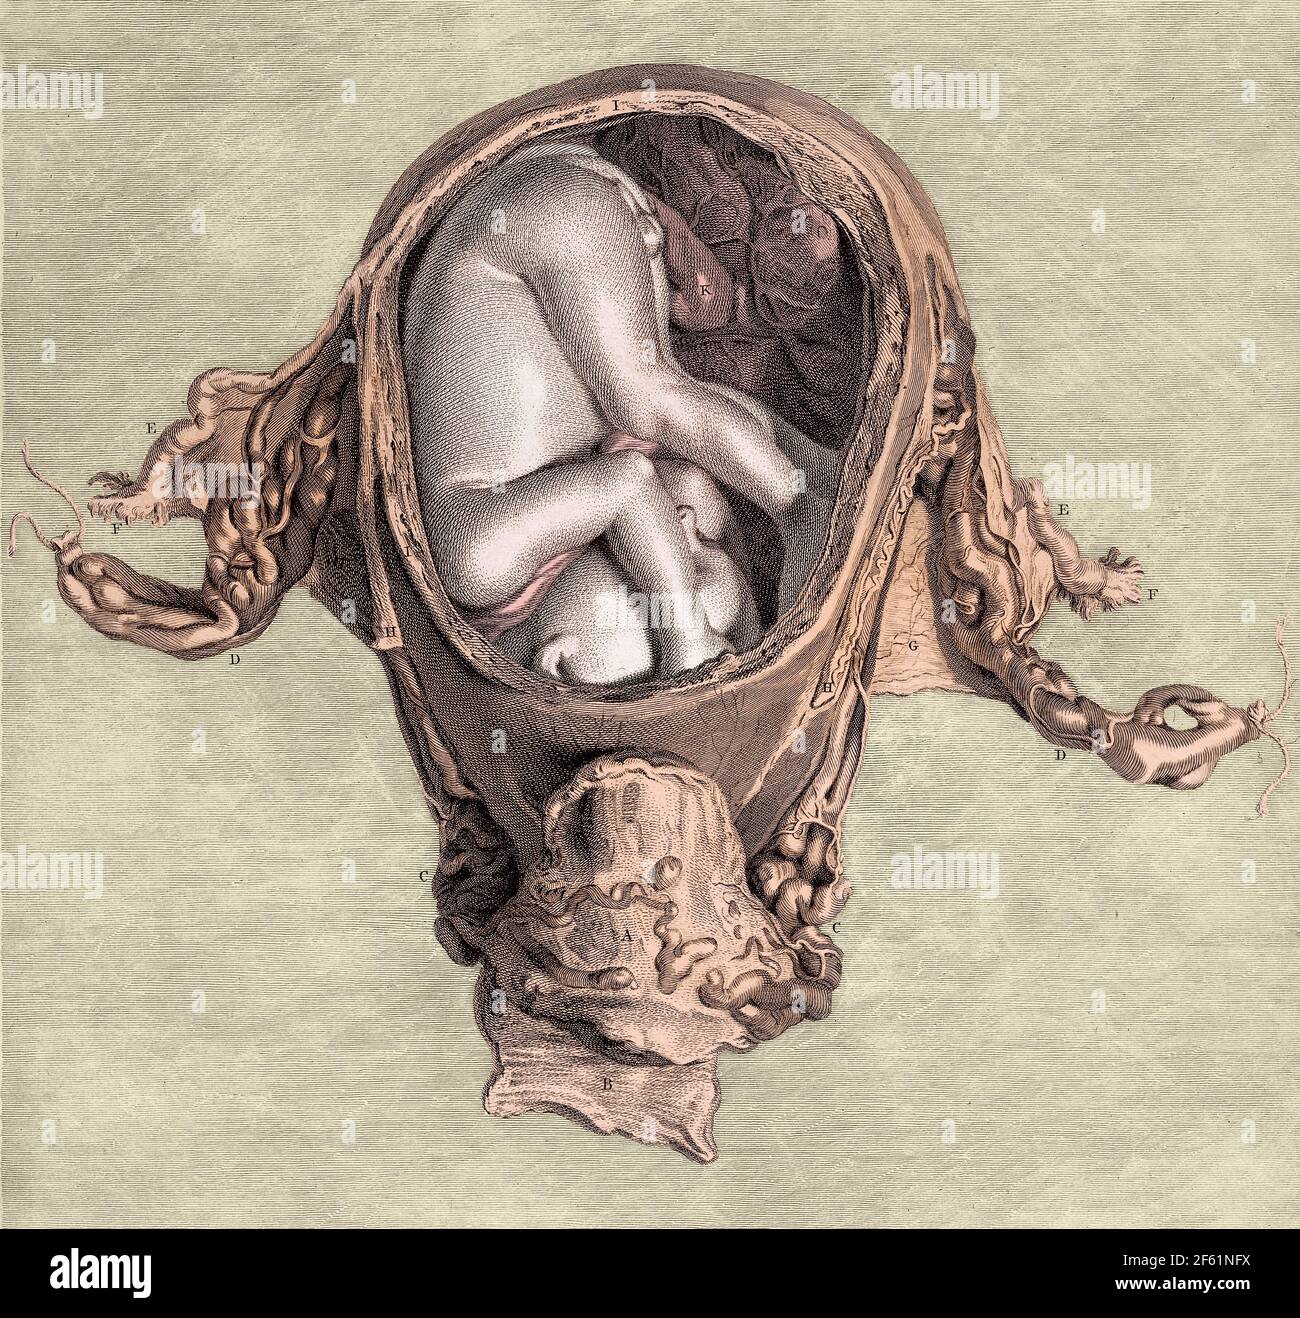 Fetus In Utero At Six Months, Illustration Stock Photo